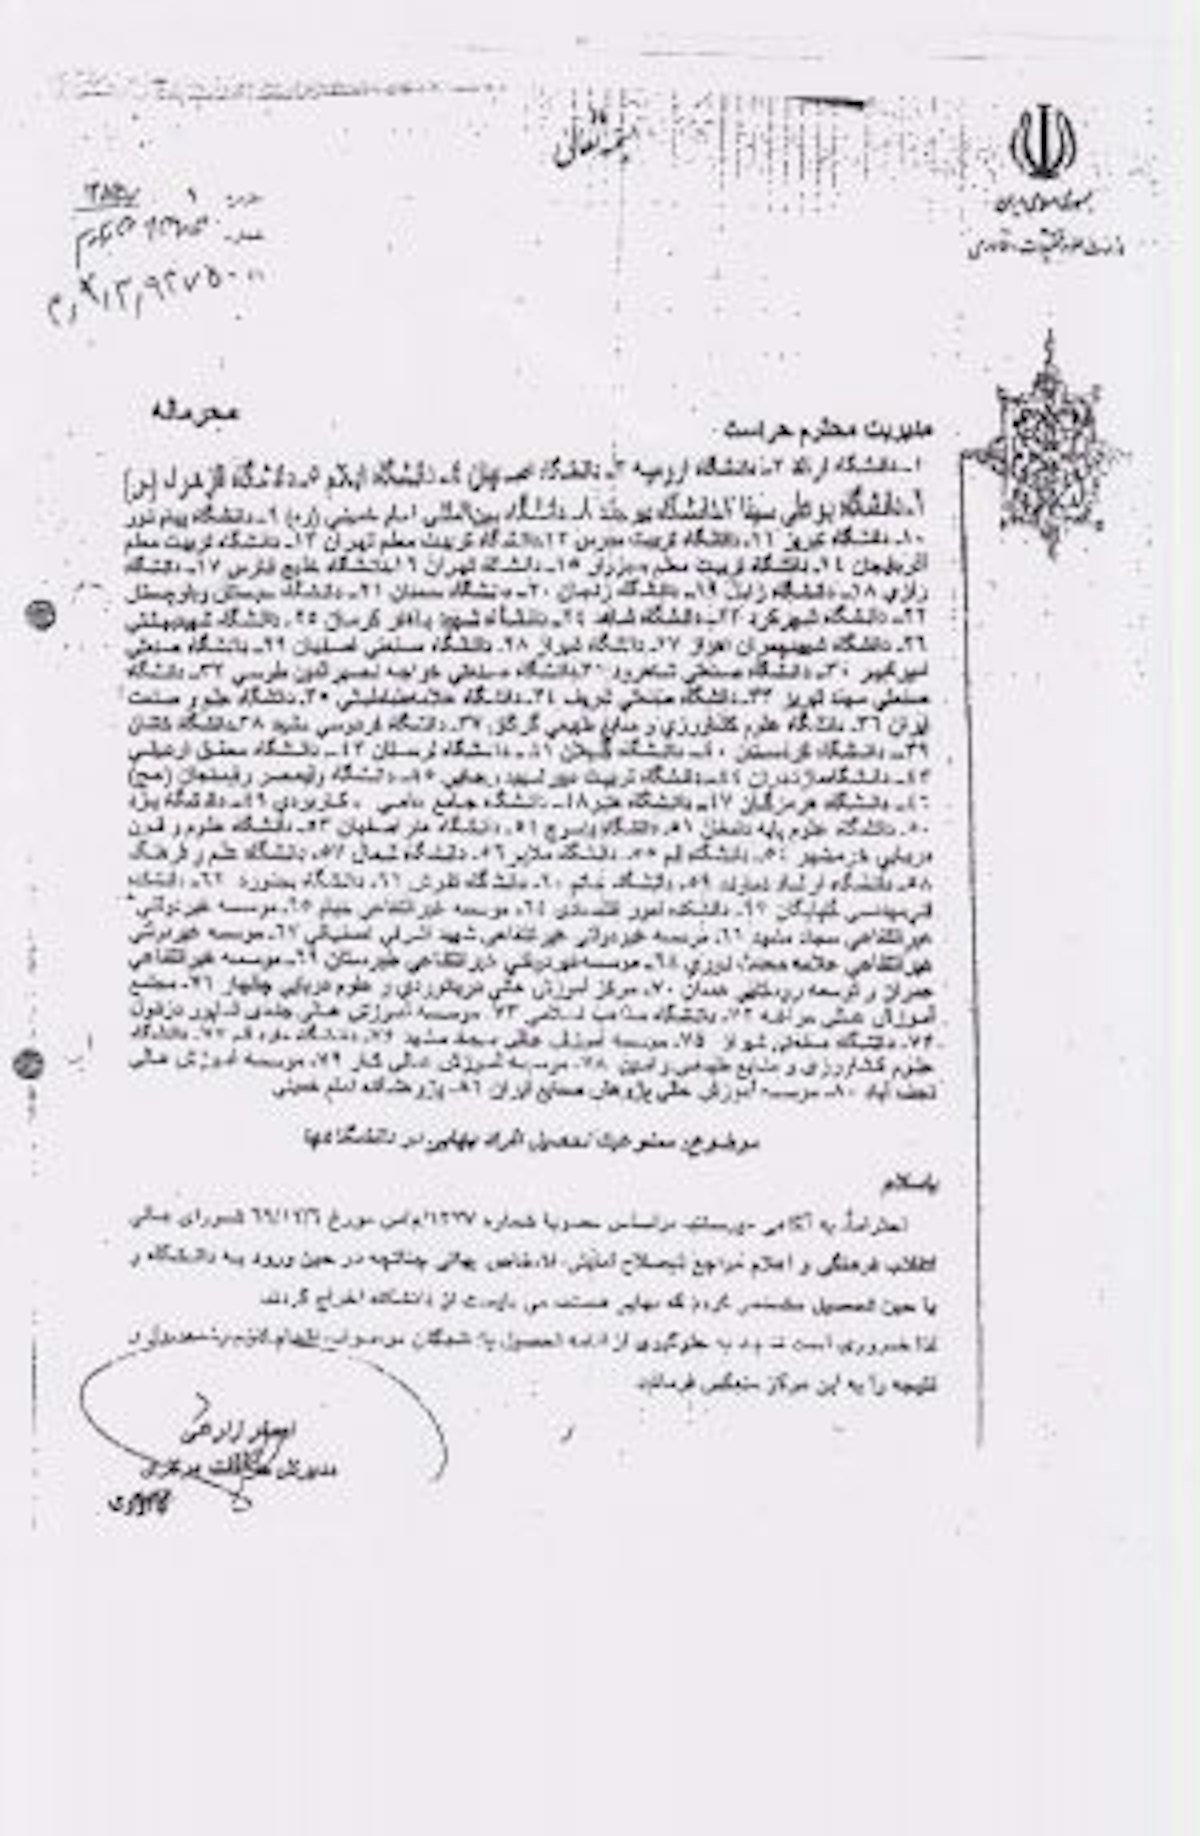 This letter from a government ministry to 81 Iranian universities instructs them to expel Baha'i students.